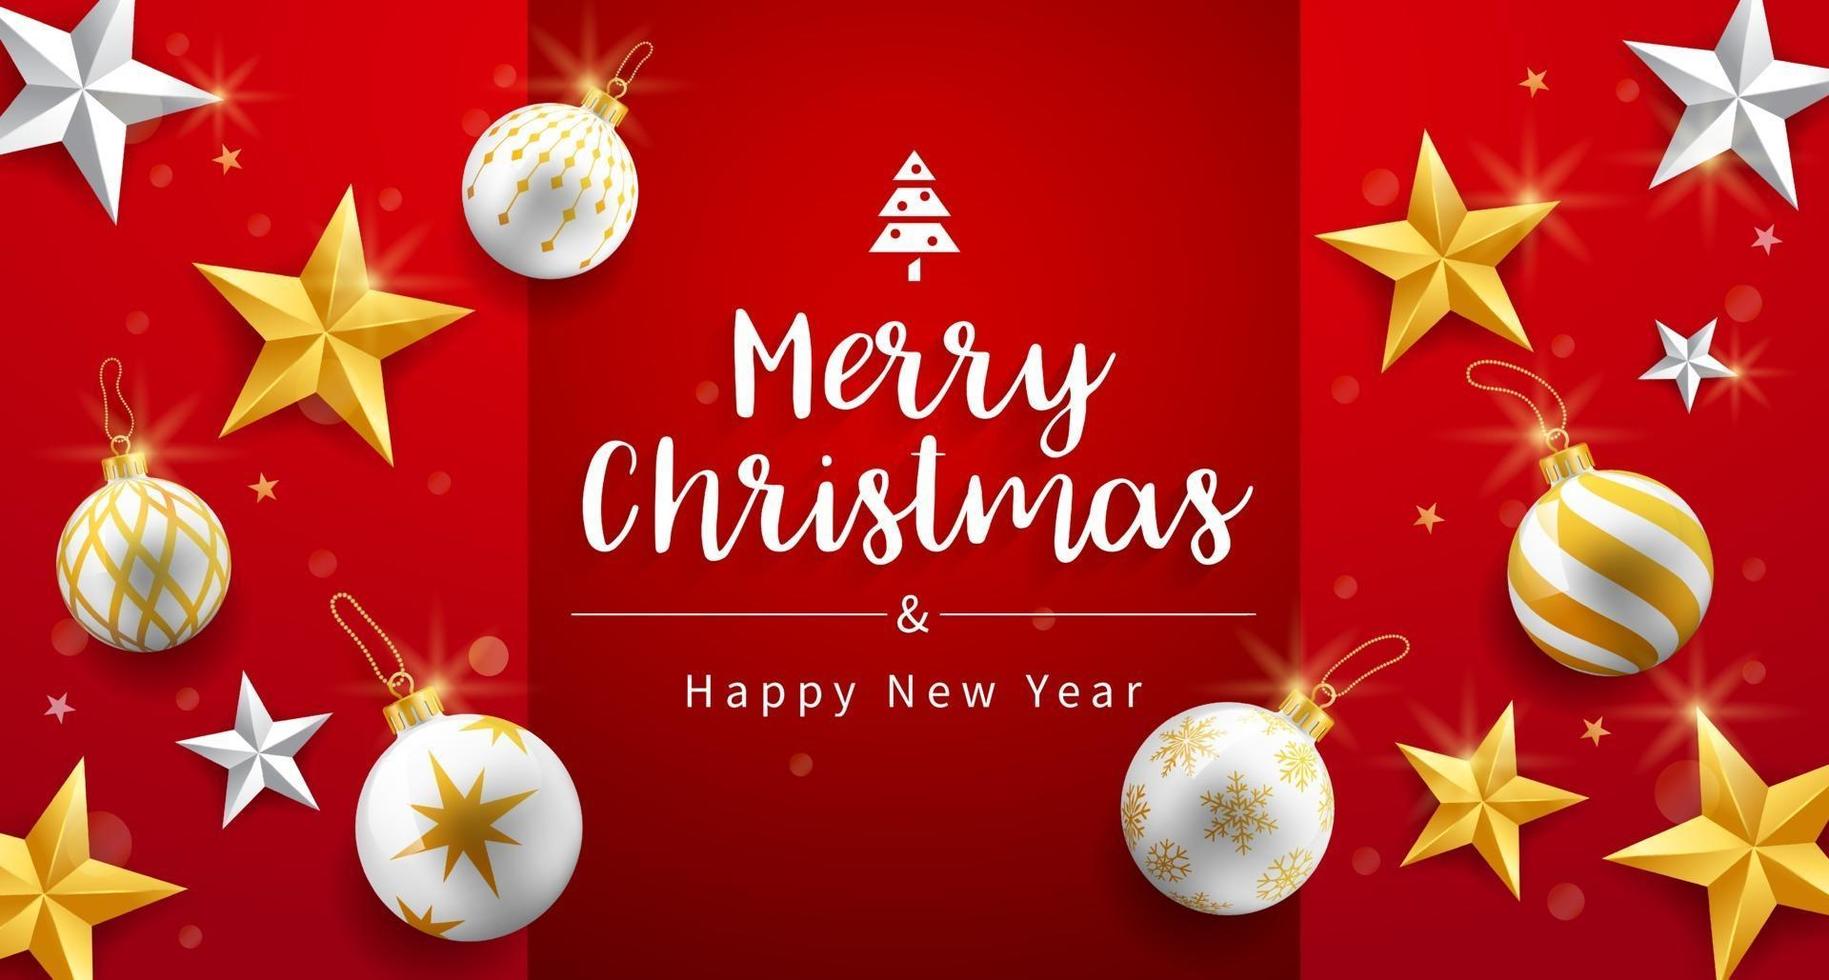 Merry christmas and happy new year card with gold, silver star and christmas ornaments bubbles background. Vector illustrations